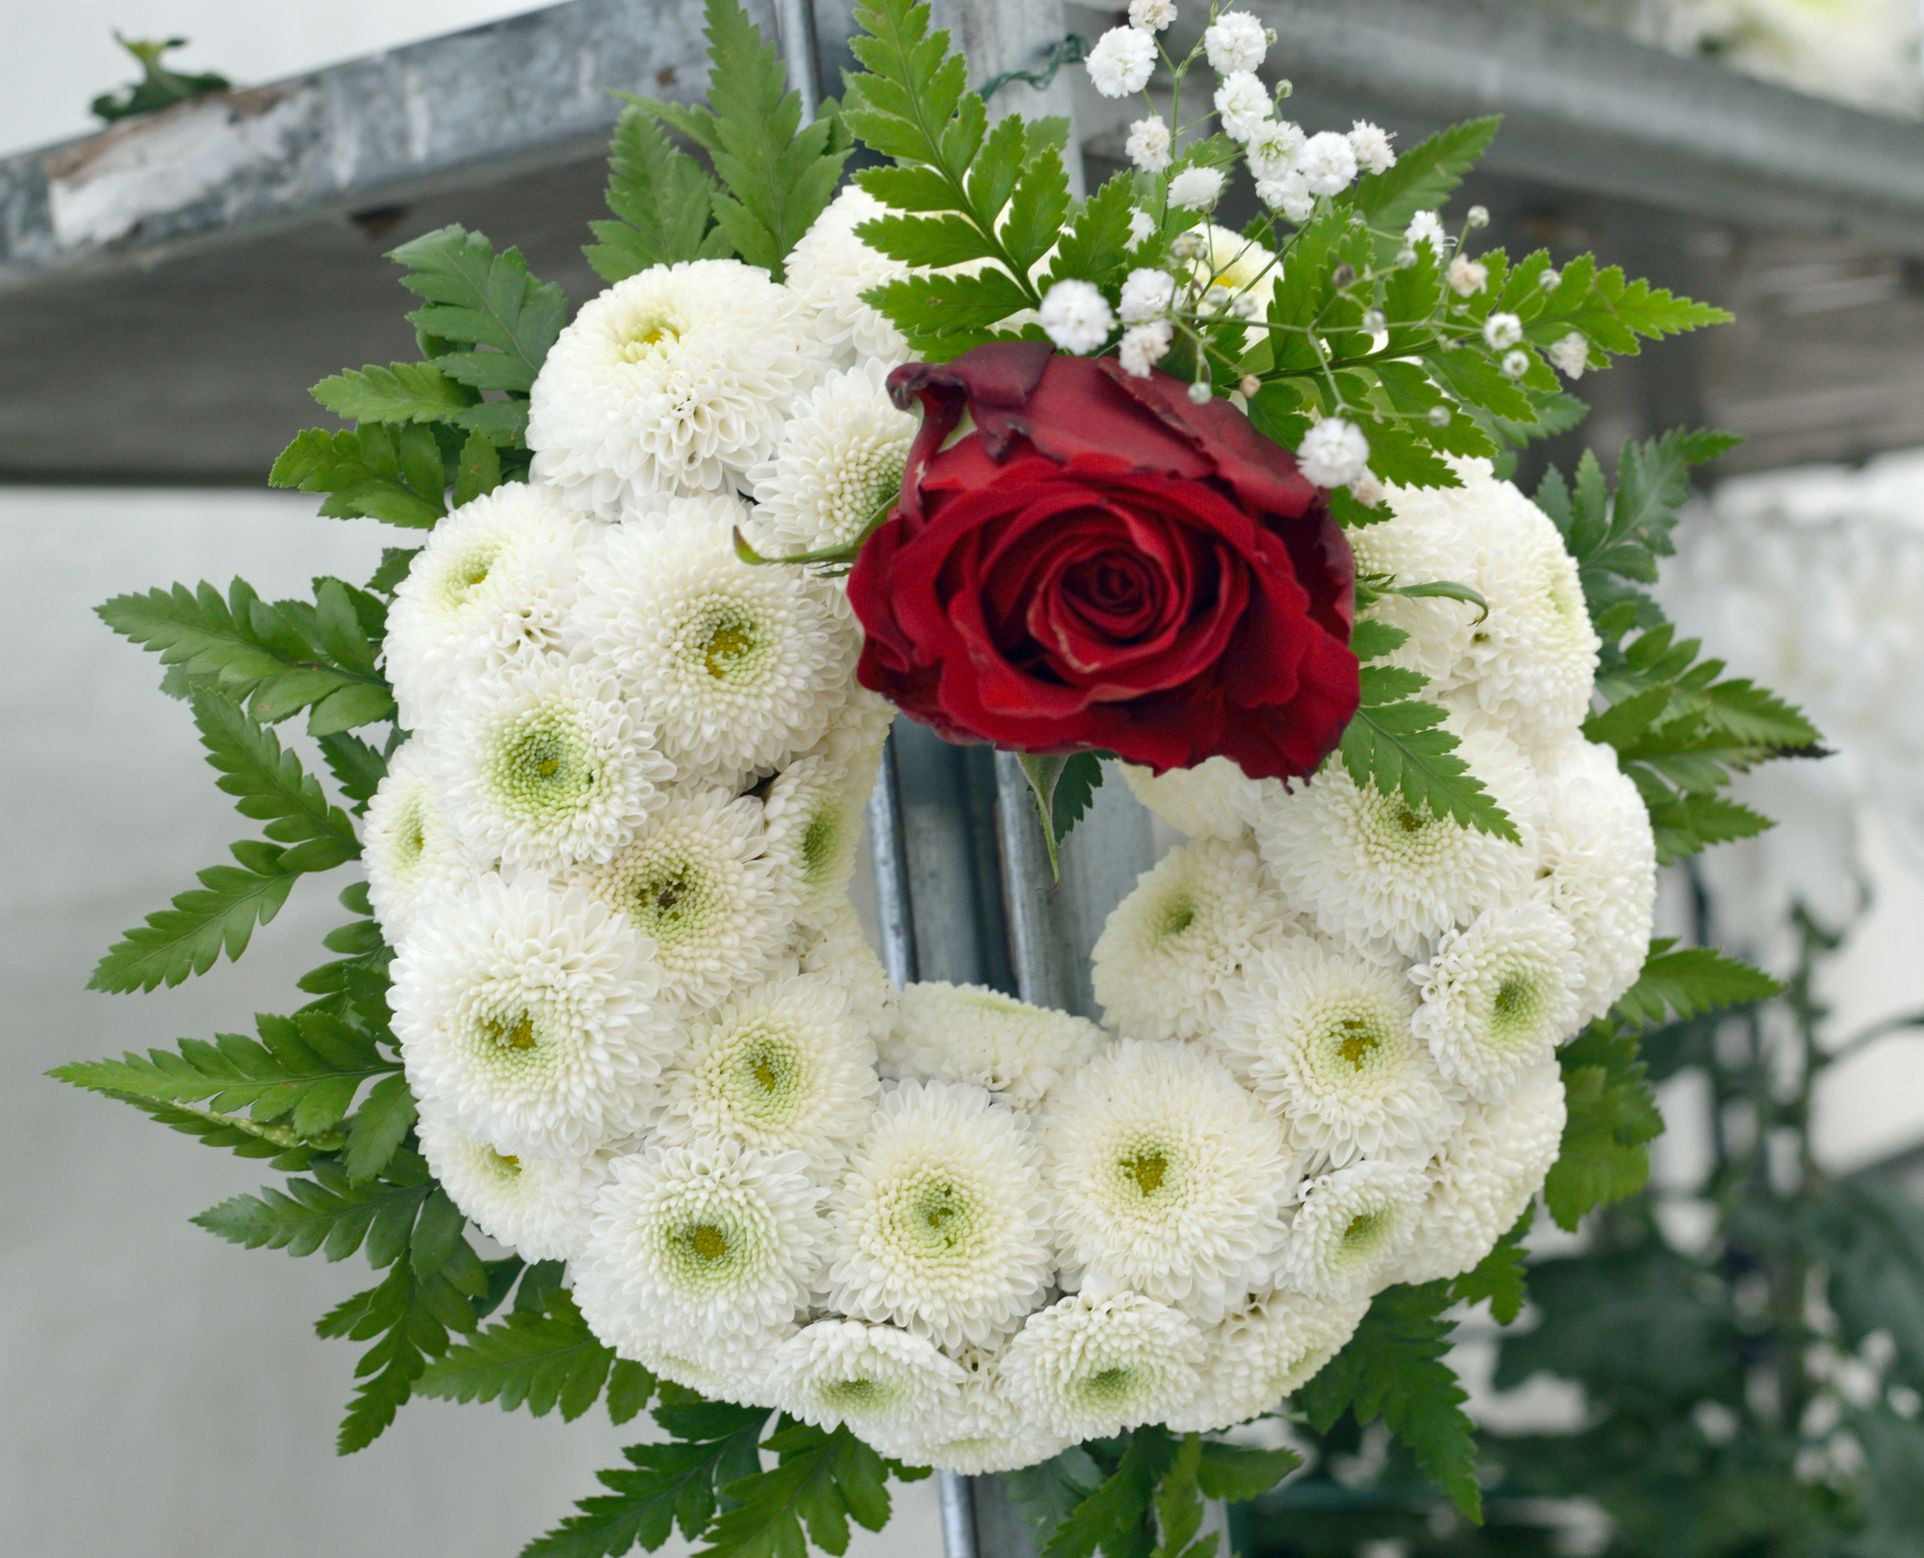 15 Nice Floral Arrangements with Fruit In Vase 2024 free download floral arrangements with fruit in vase of proper etiquette for sending funeral flowers in funeralwreath gettyimages 591655301 5a3edccc5b6e240037ffc773